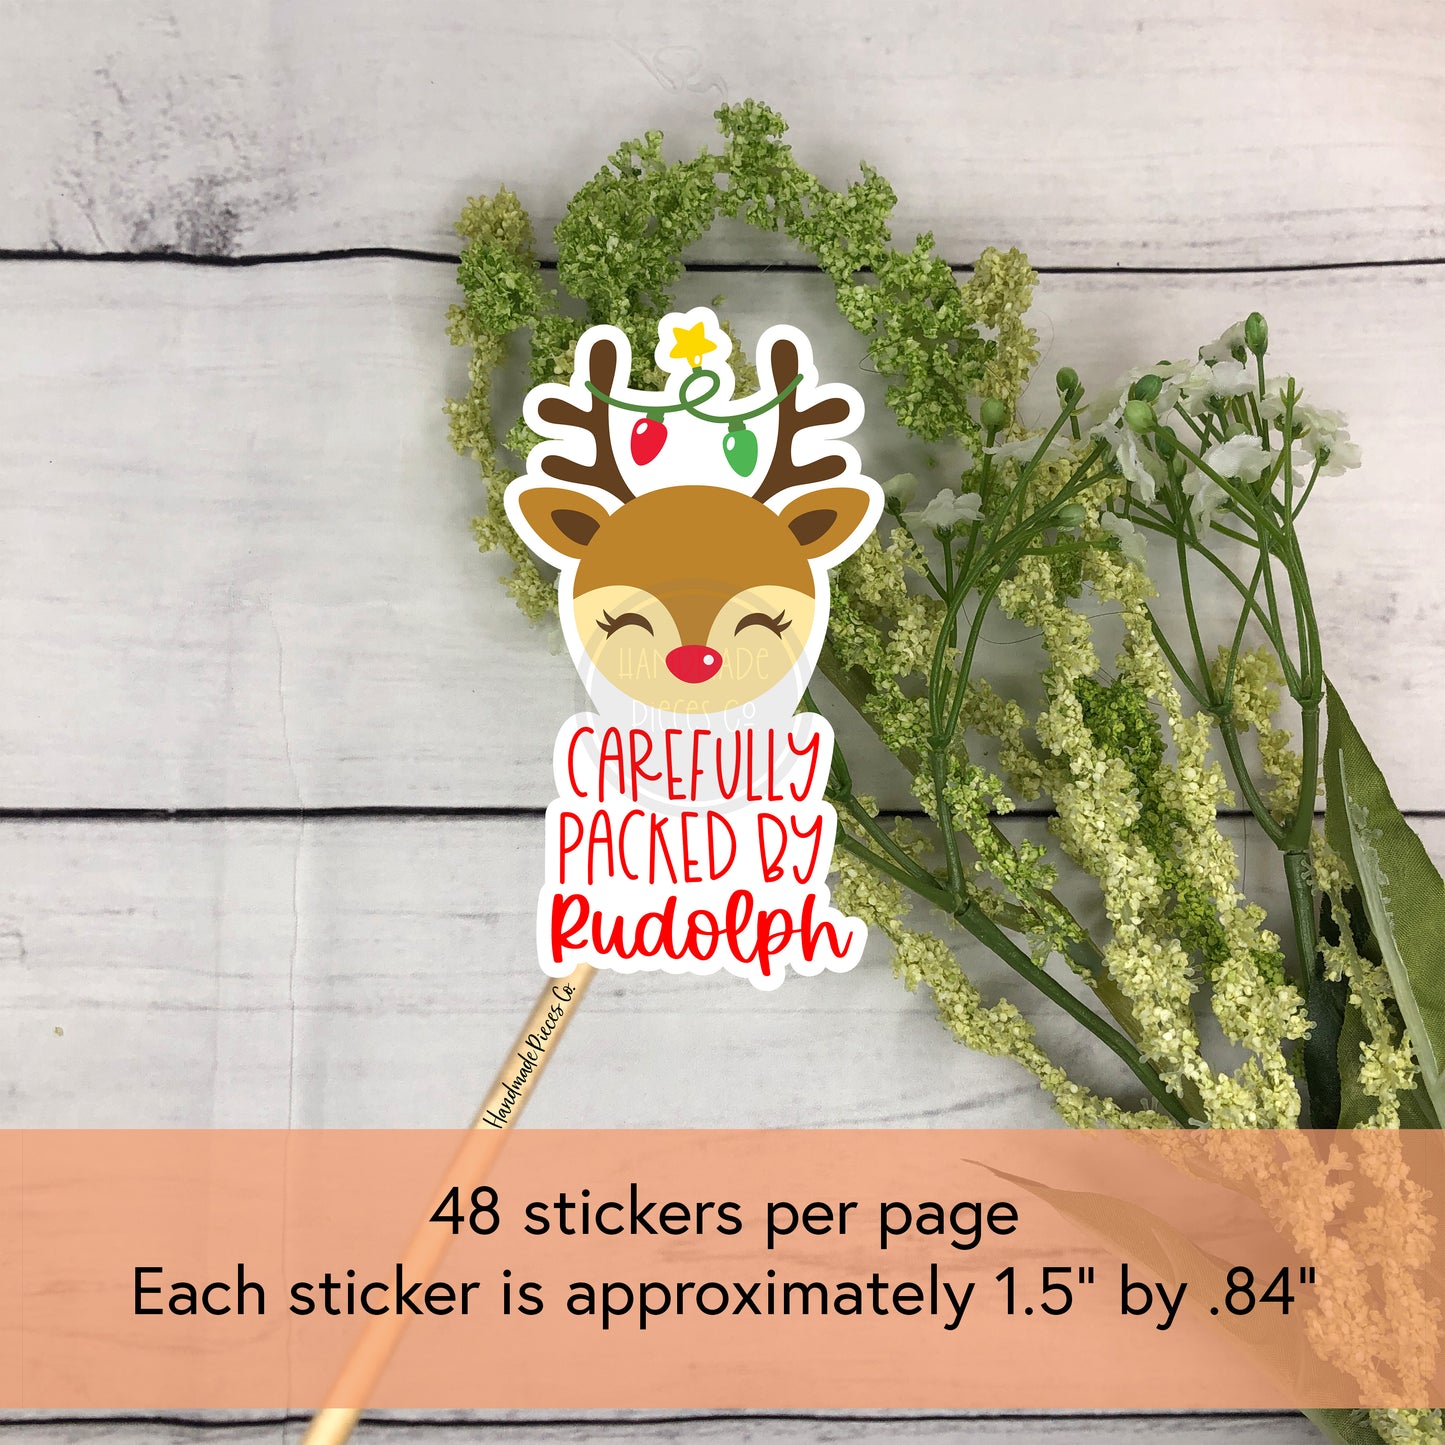 Carefully Packed by Rudolph Packaging Sticker